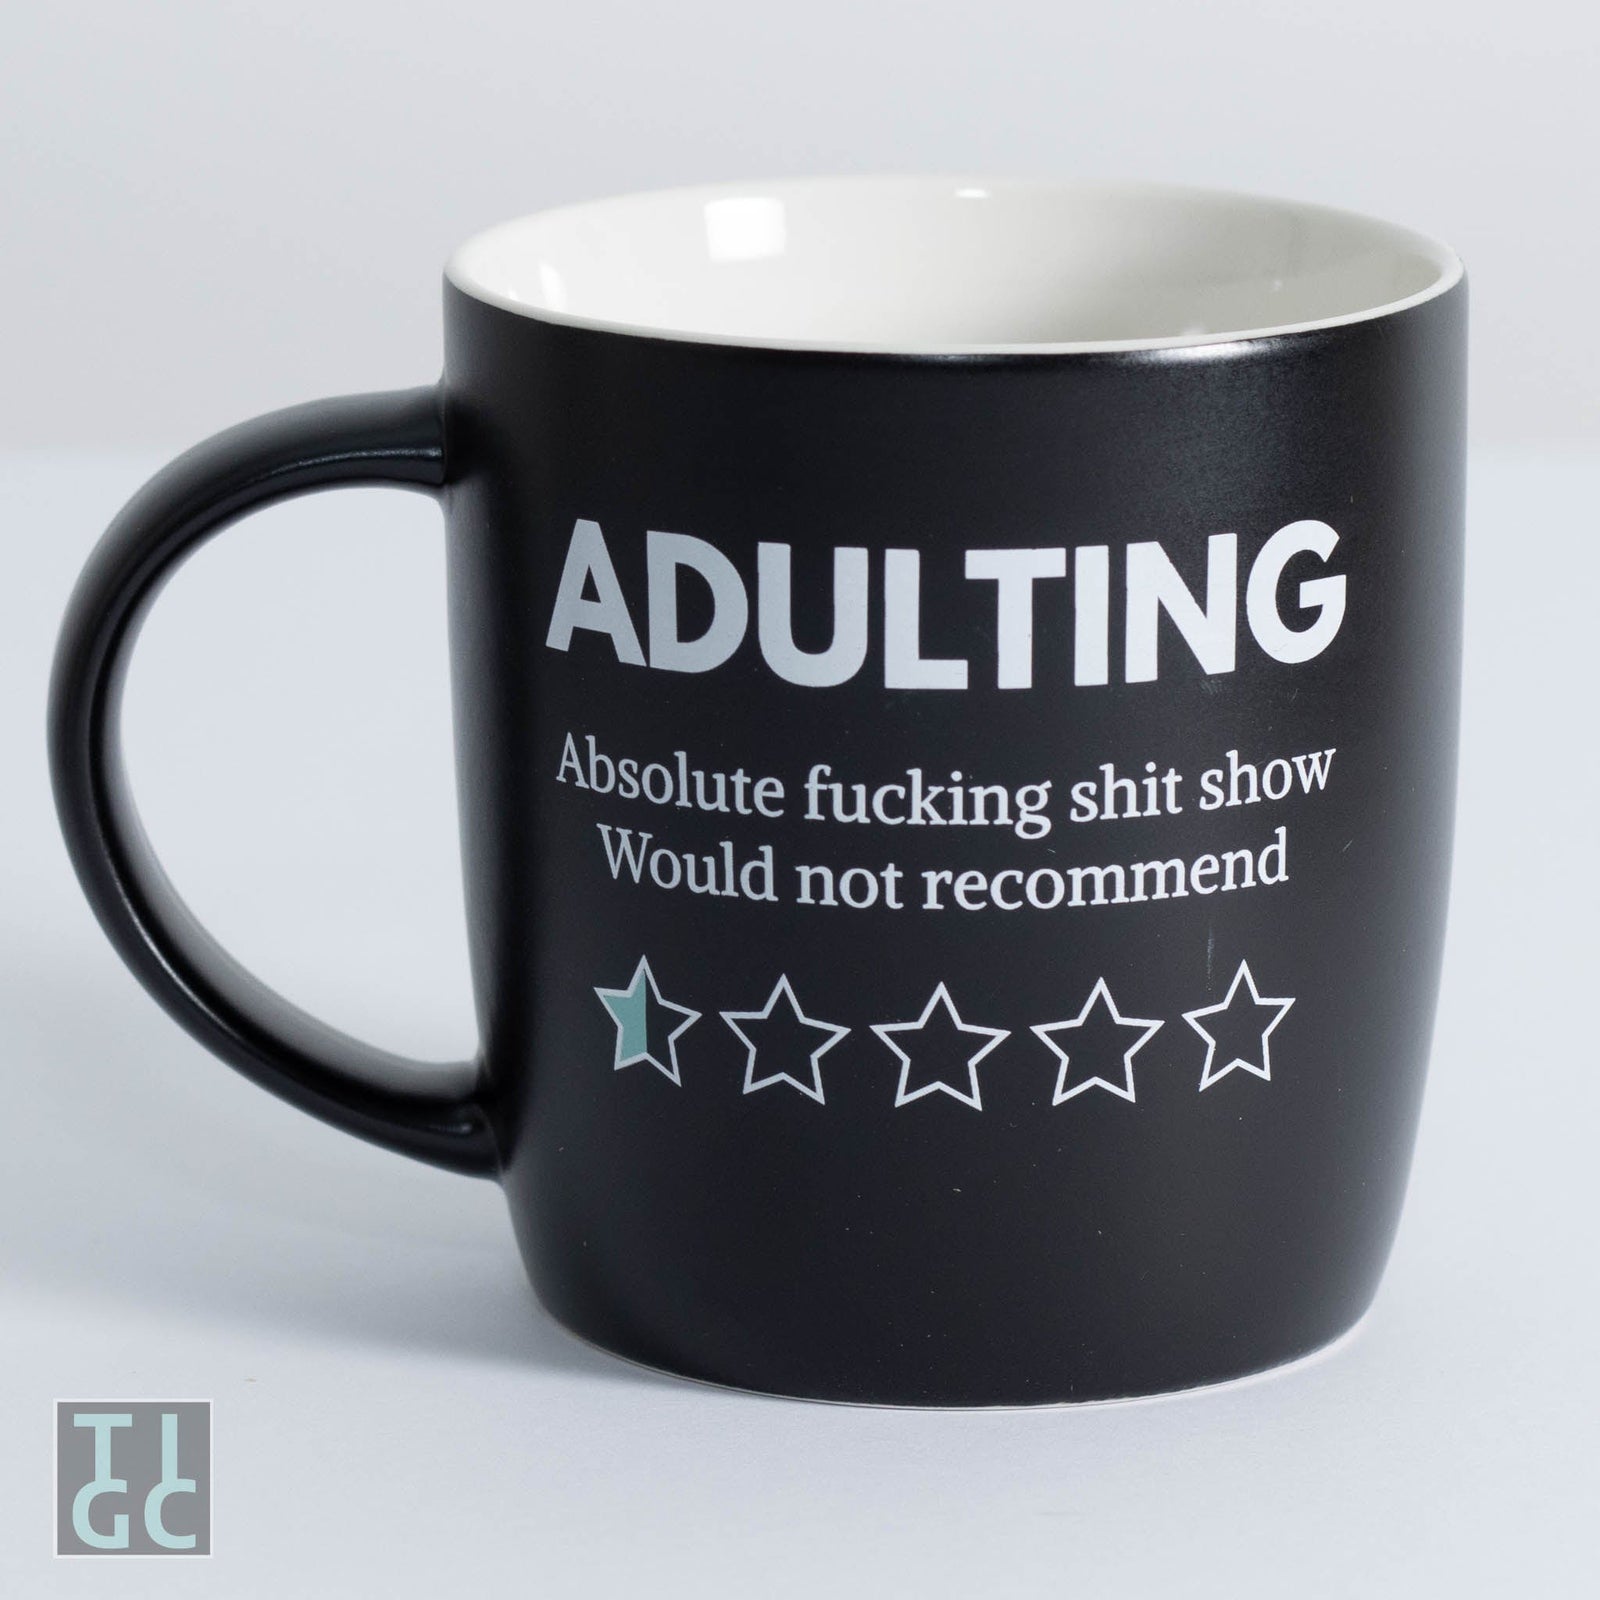 https://theinappropriategiftco.com/cdn/shop/files/tigc-the-inappropriate-gift-co-adulting-do-not-recommend-mug-30906487341098_1600x.jpg?v=1702013983